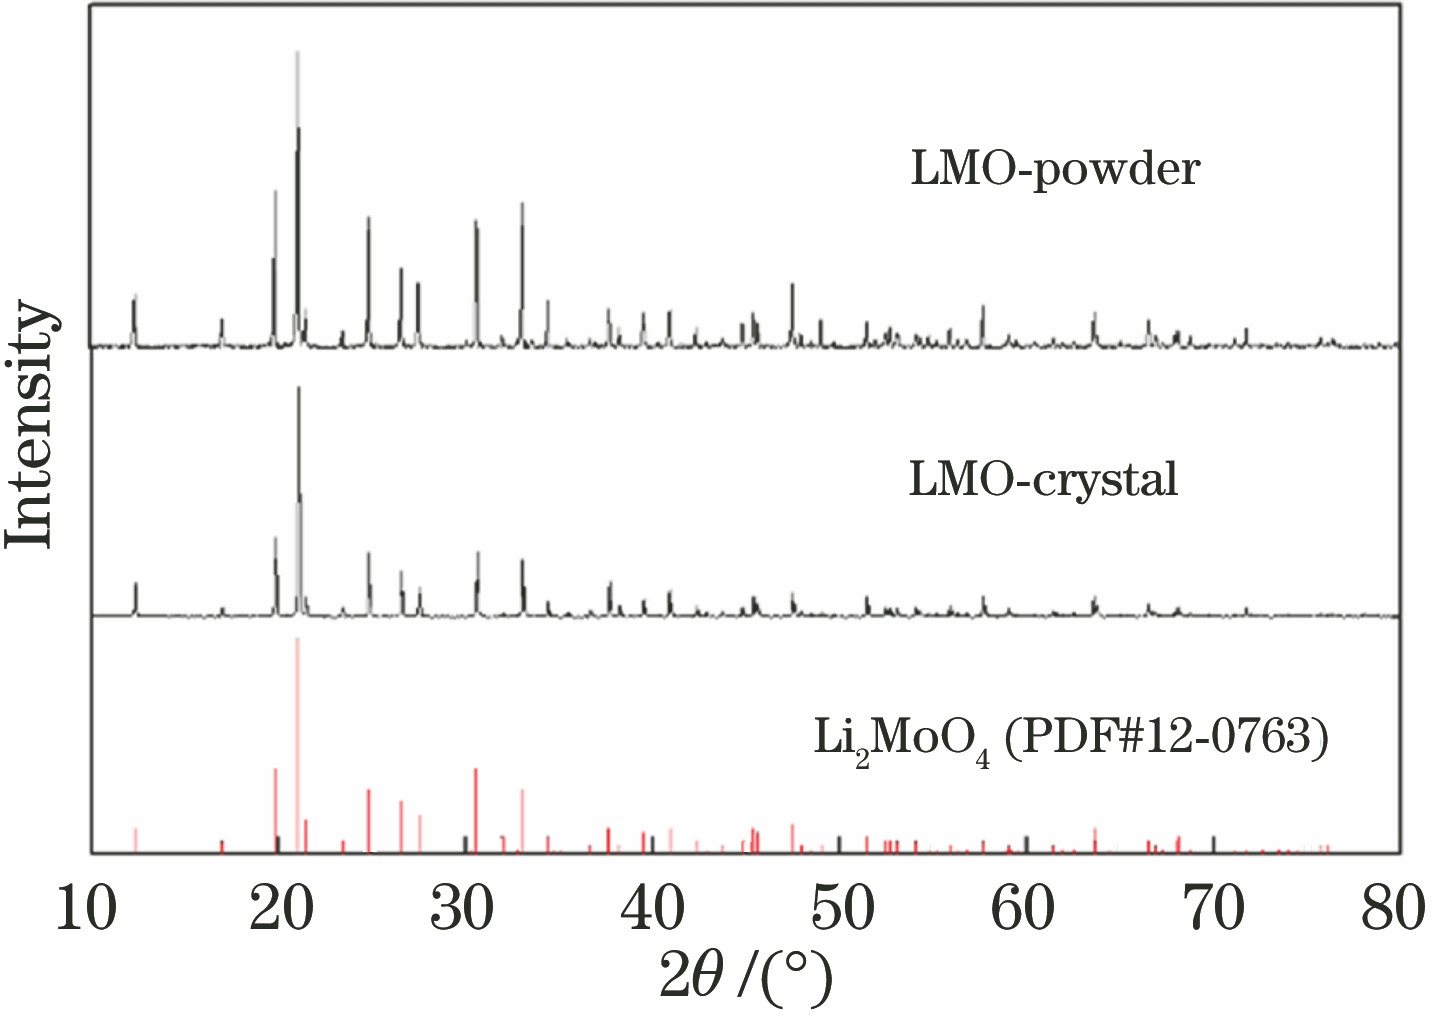 XRD spectra of LMO powder and crystal